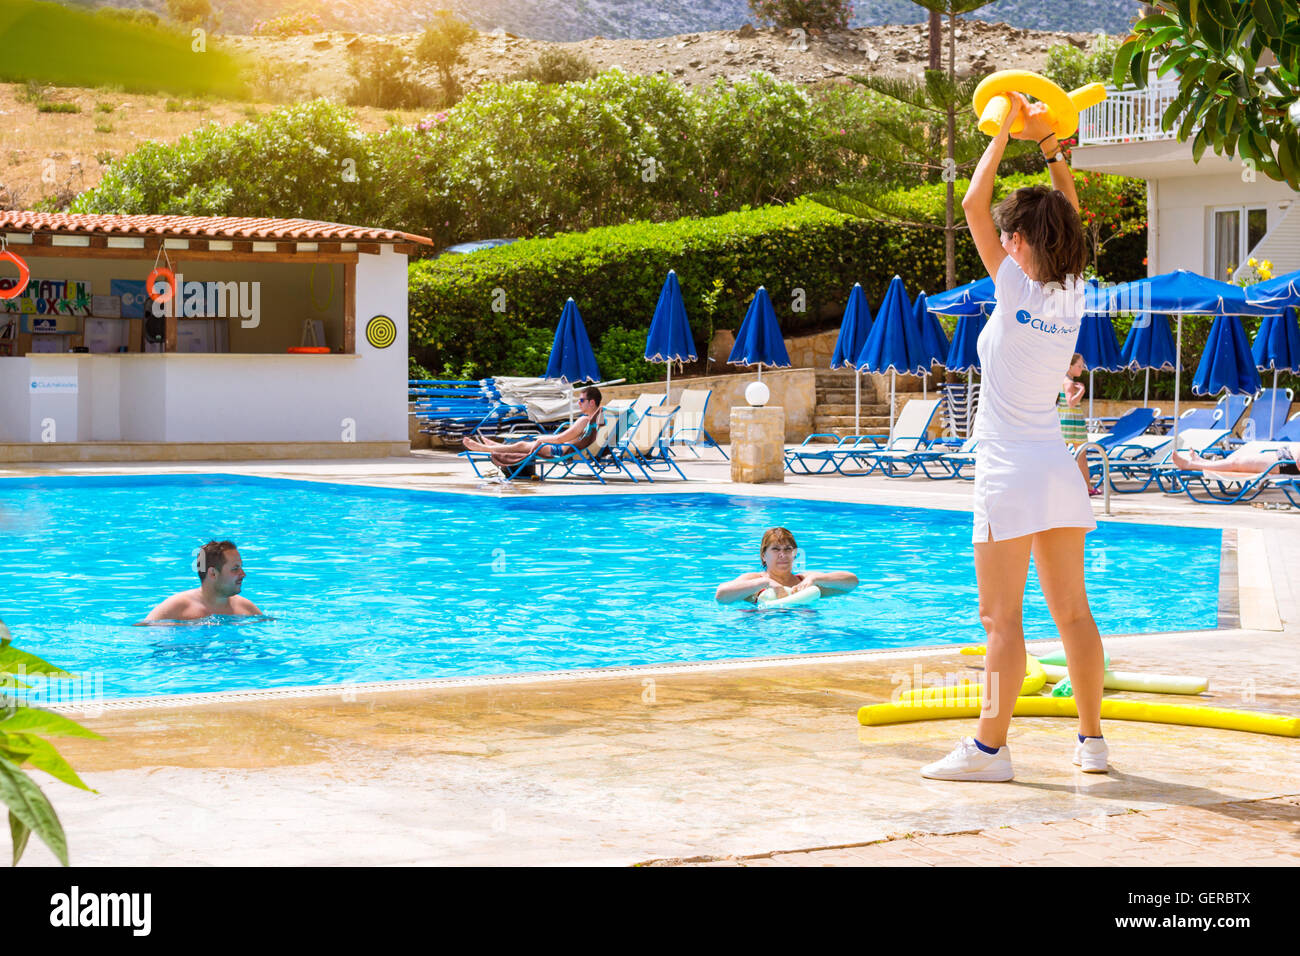 BALI, GREECE - APRIL 29, 2016: Animation at Resort hotel Atali Village 4 star. Cute girl in white beach suit conducts aerobic Stock Photo